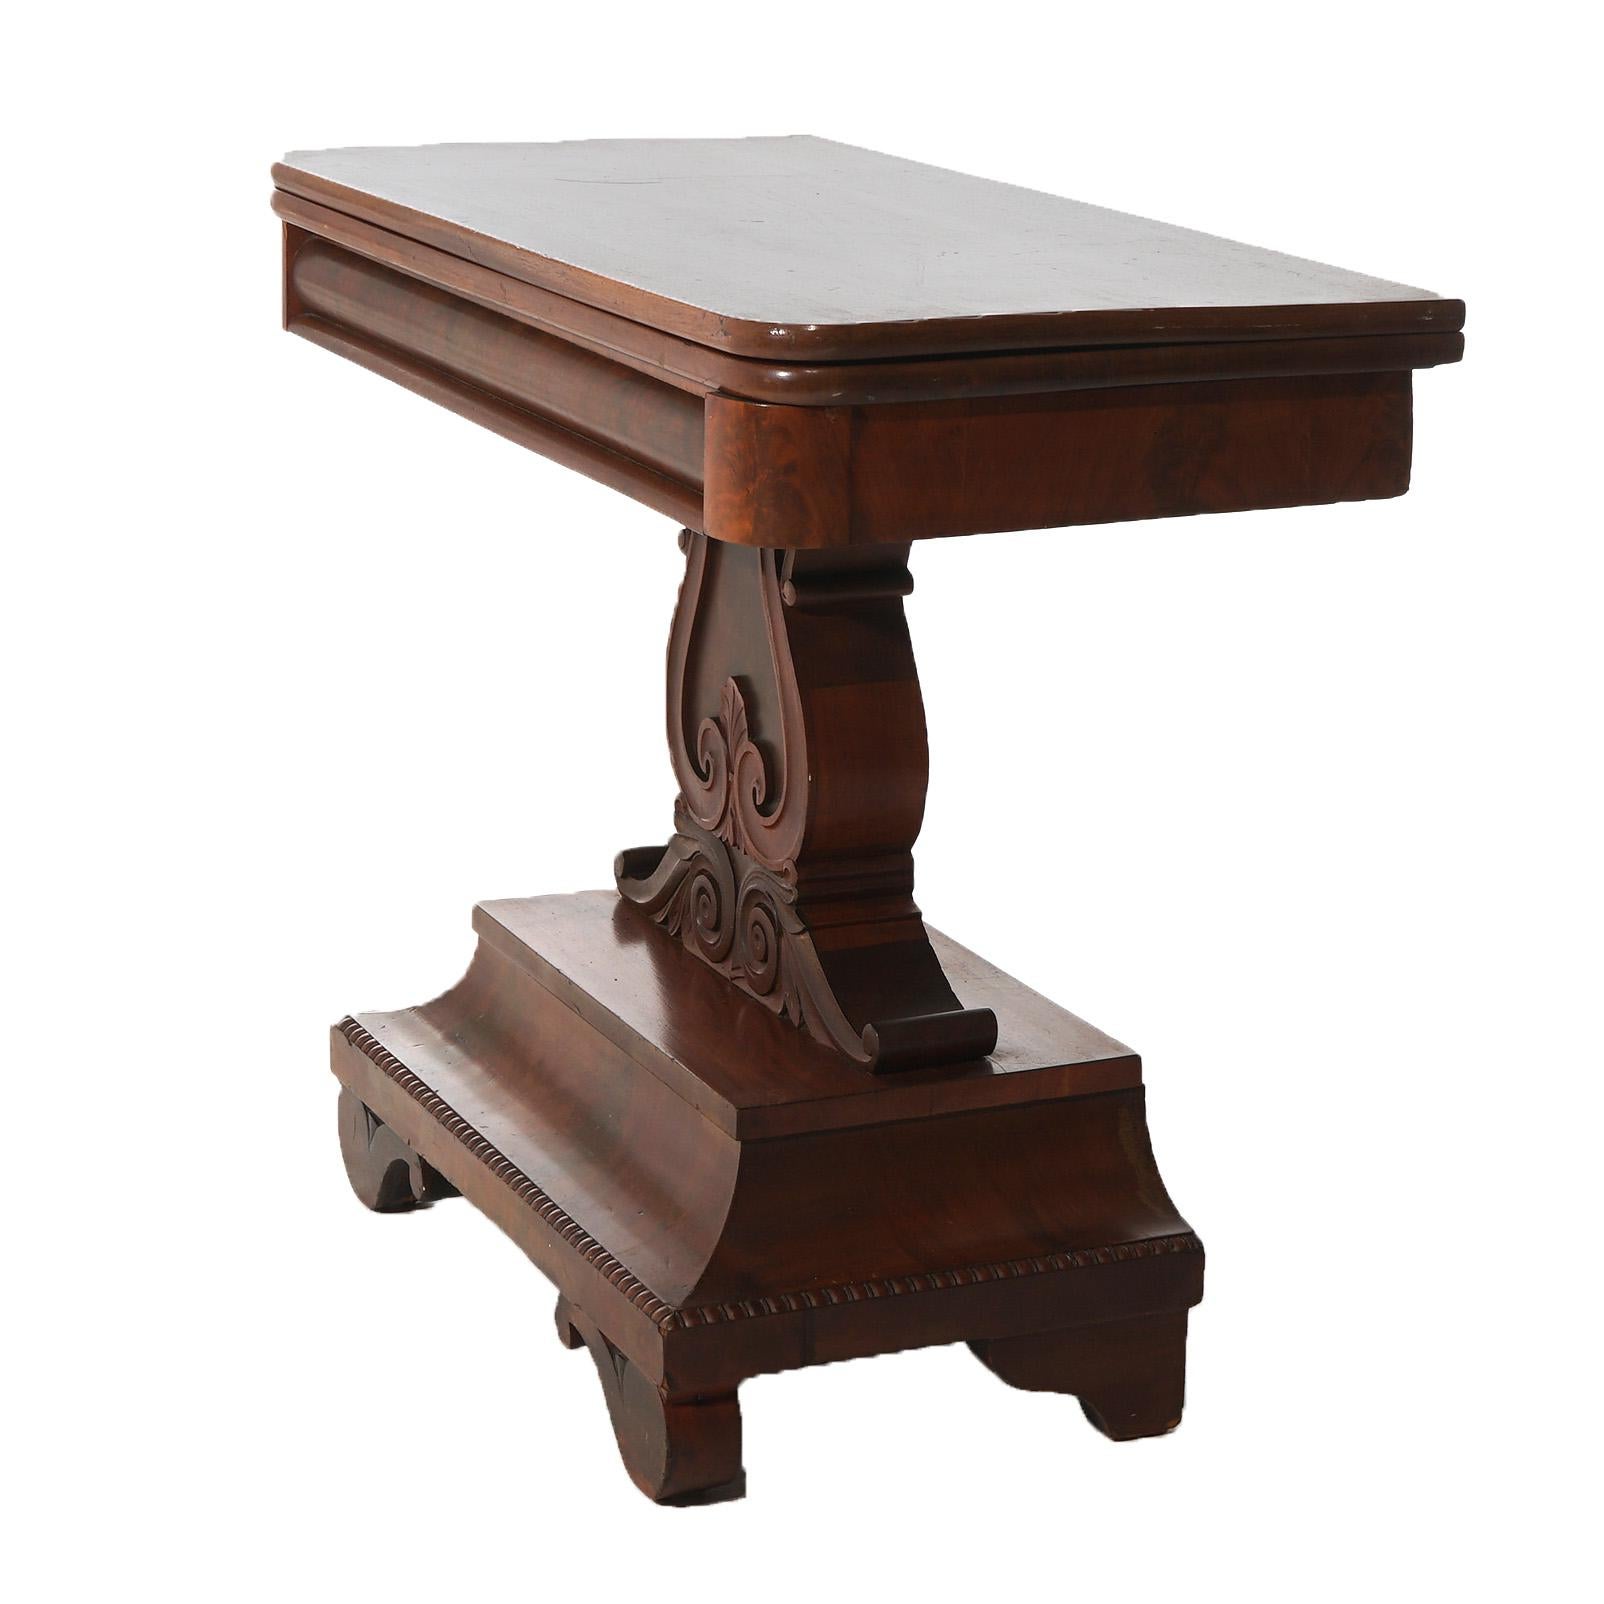 Antique American Empire Neoclassical Greco Flame Mahogany Card Table C1840 For Sale 6